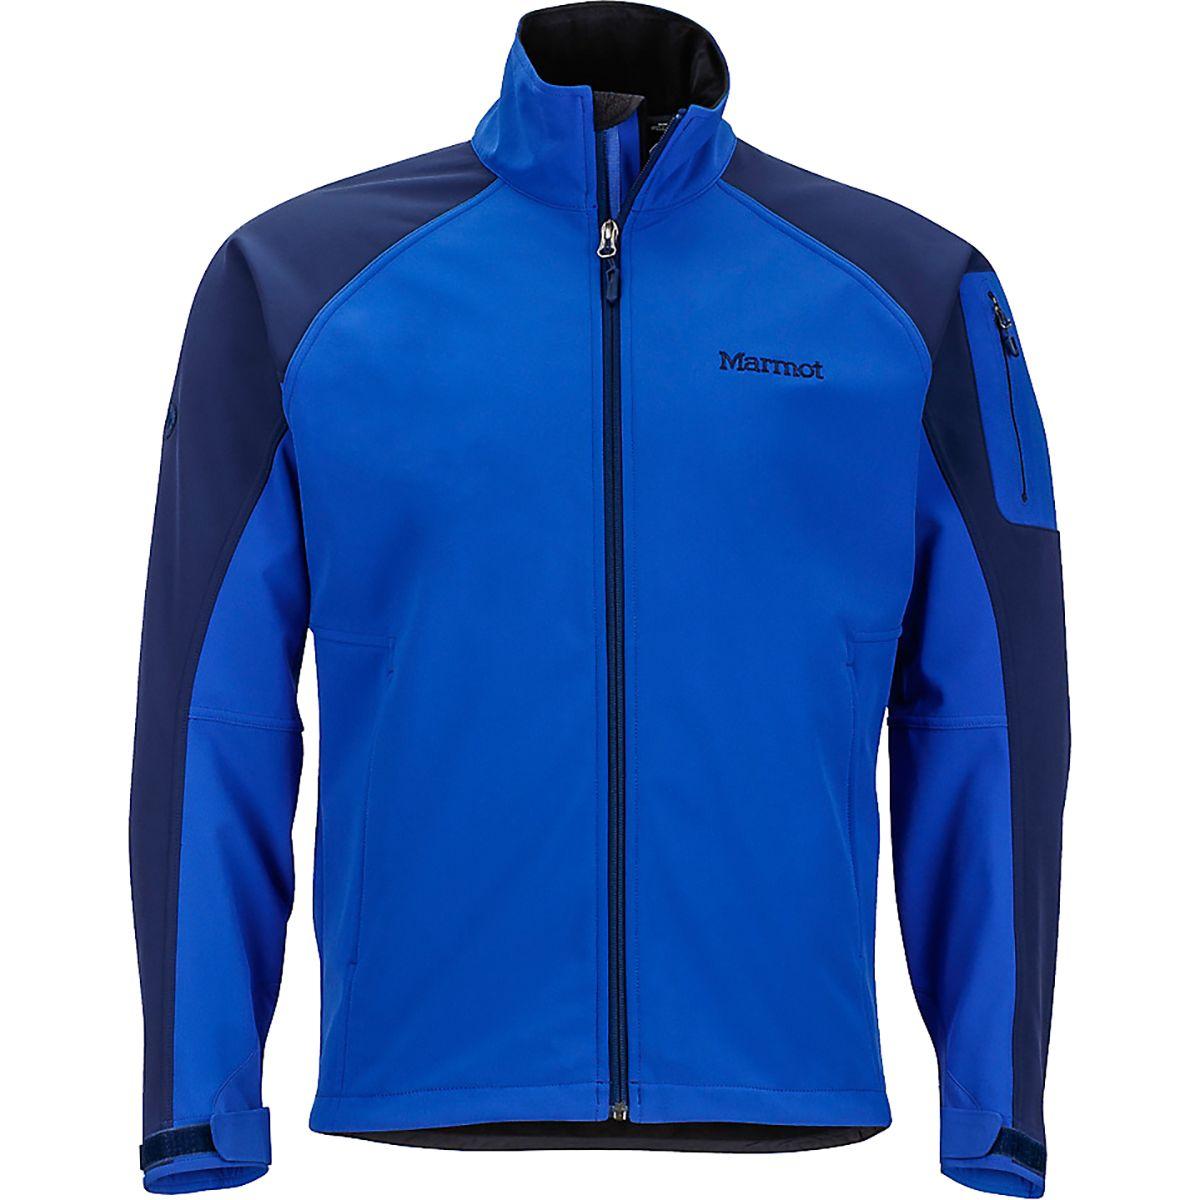 Marmot Synthetic Gravity Softshell Jacket in Blue for Men - Lyst